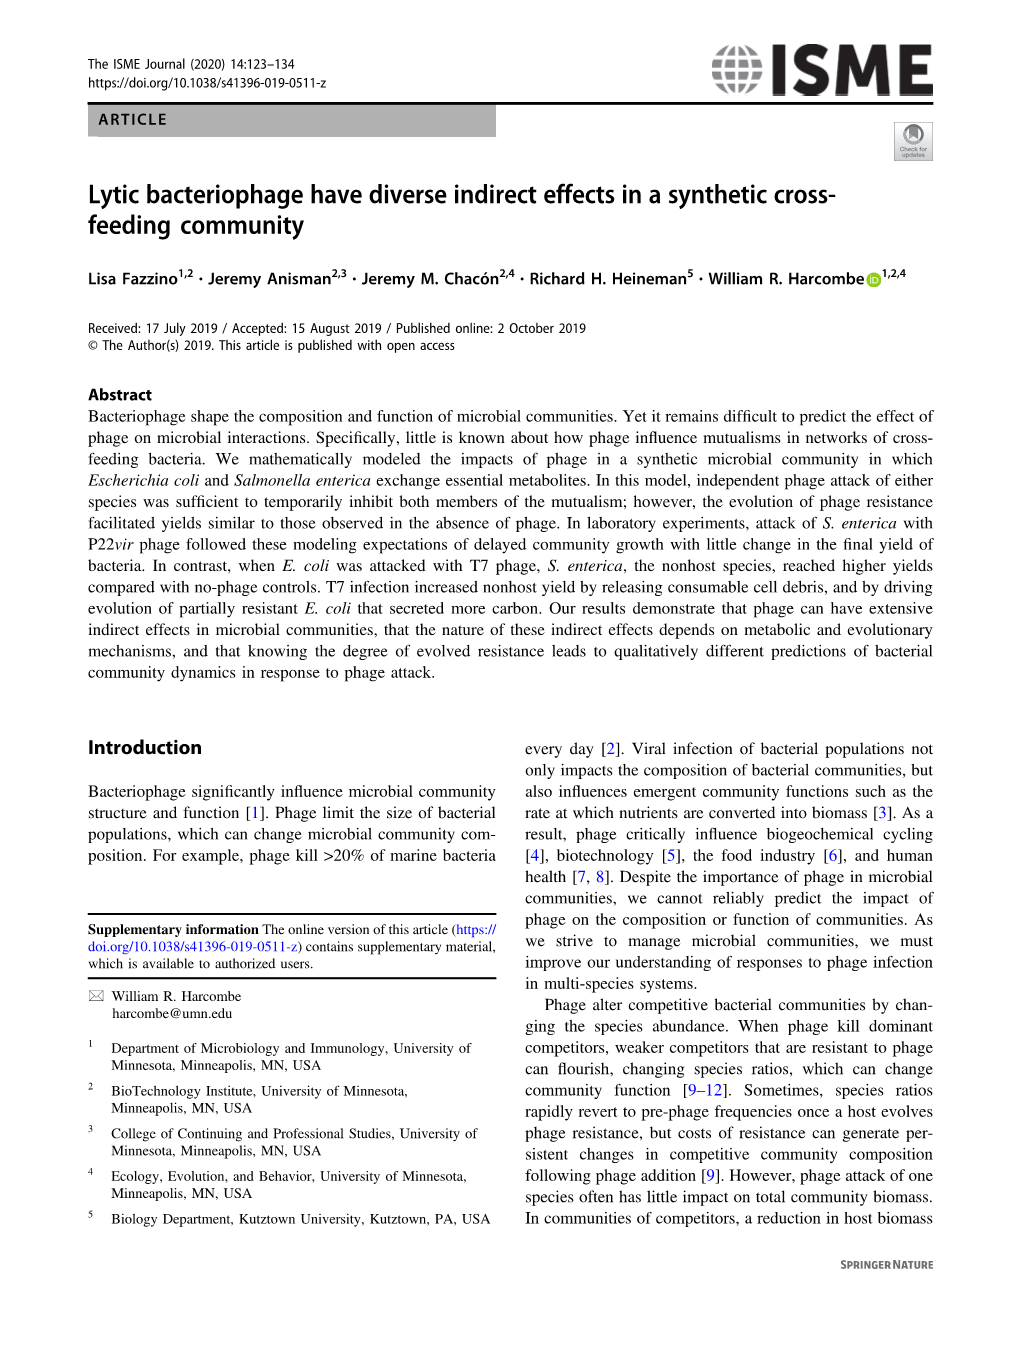 Lytic Bacteriophage Have Diverse Indirect Effects in a Synthetic Cross-Feeding Community 125